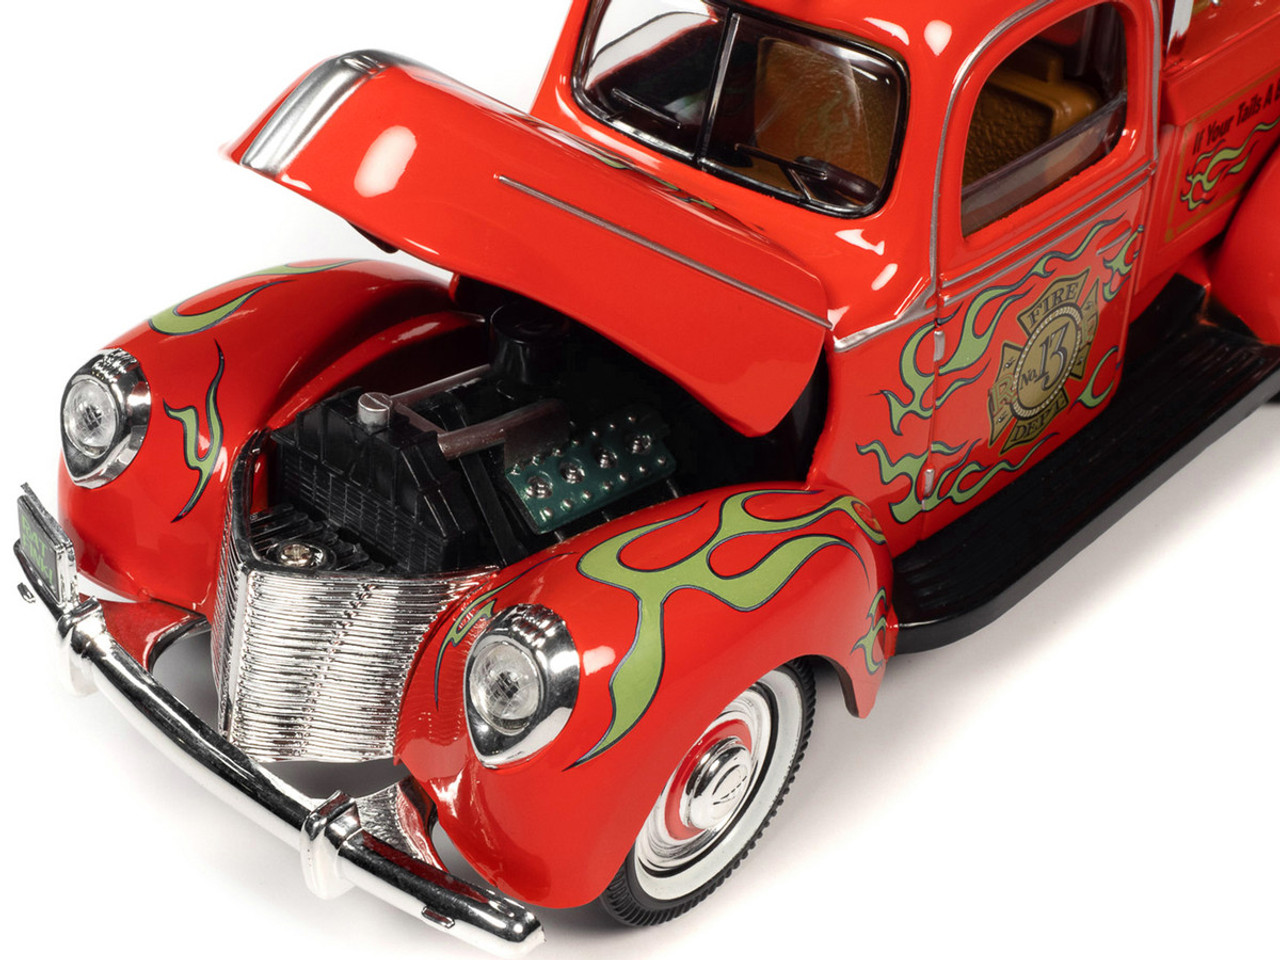 1/18 Auto World "Rat Fink" Fire Engine Truck Red with Graphics and Rat Fink Firefighter Resin Figure Diecast Car Model